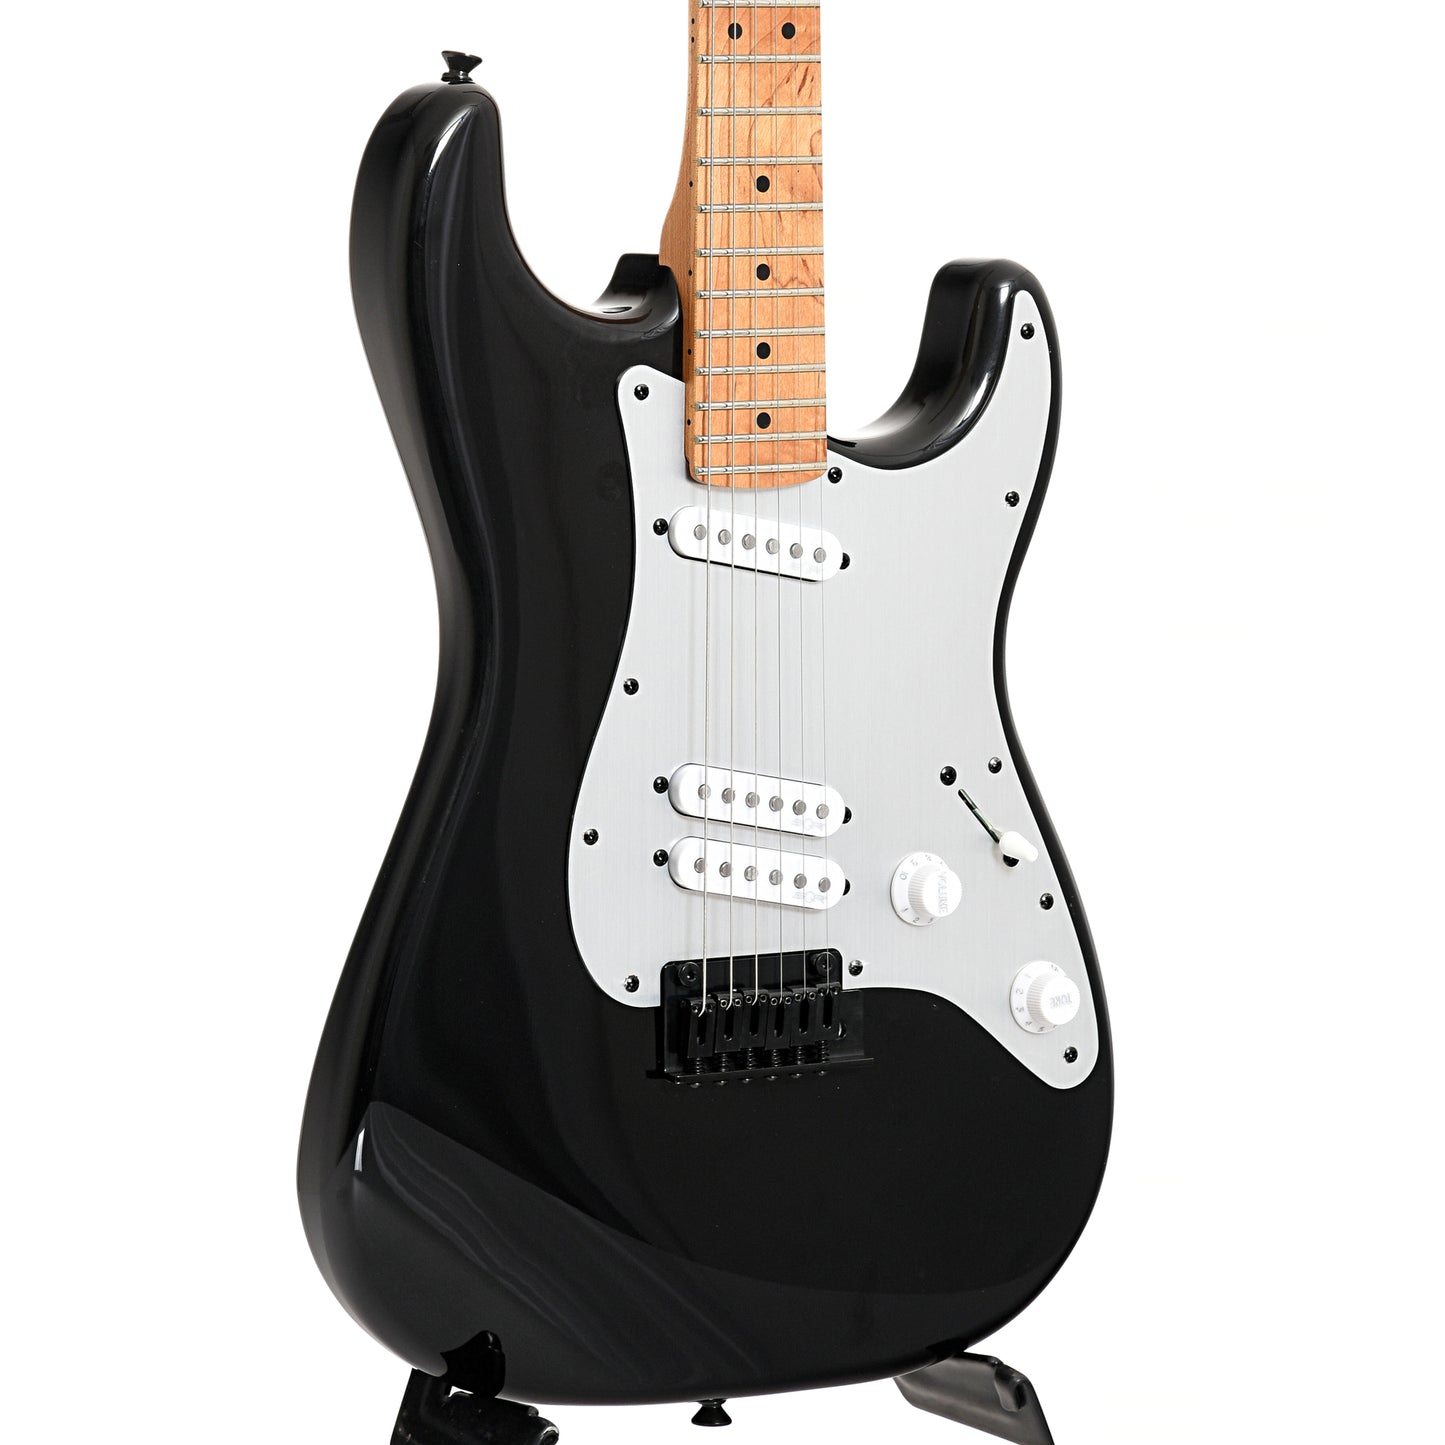 Image 3 of Squier Contemporary Stratocaster Special, Black - SKU# SCSSB : Product Type Solid Body Electric Guitars : Elderly Instruments